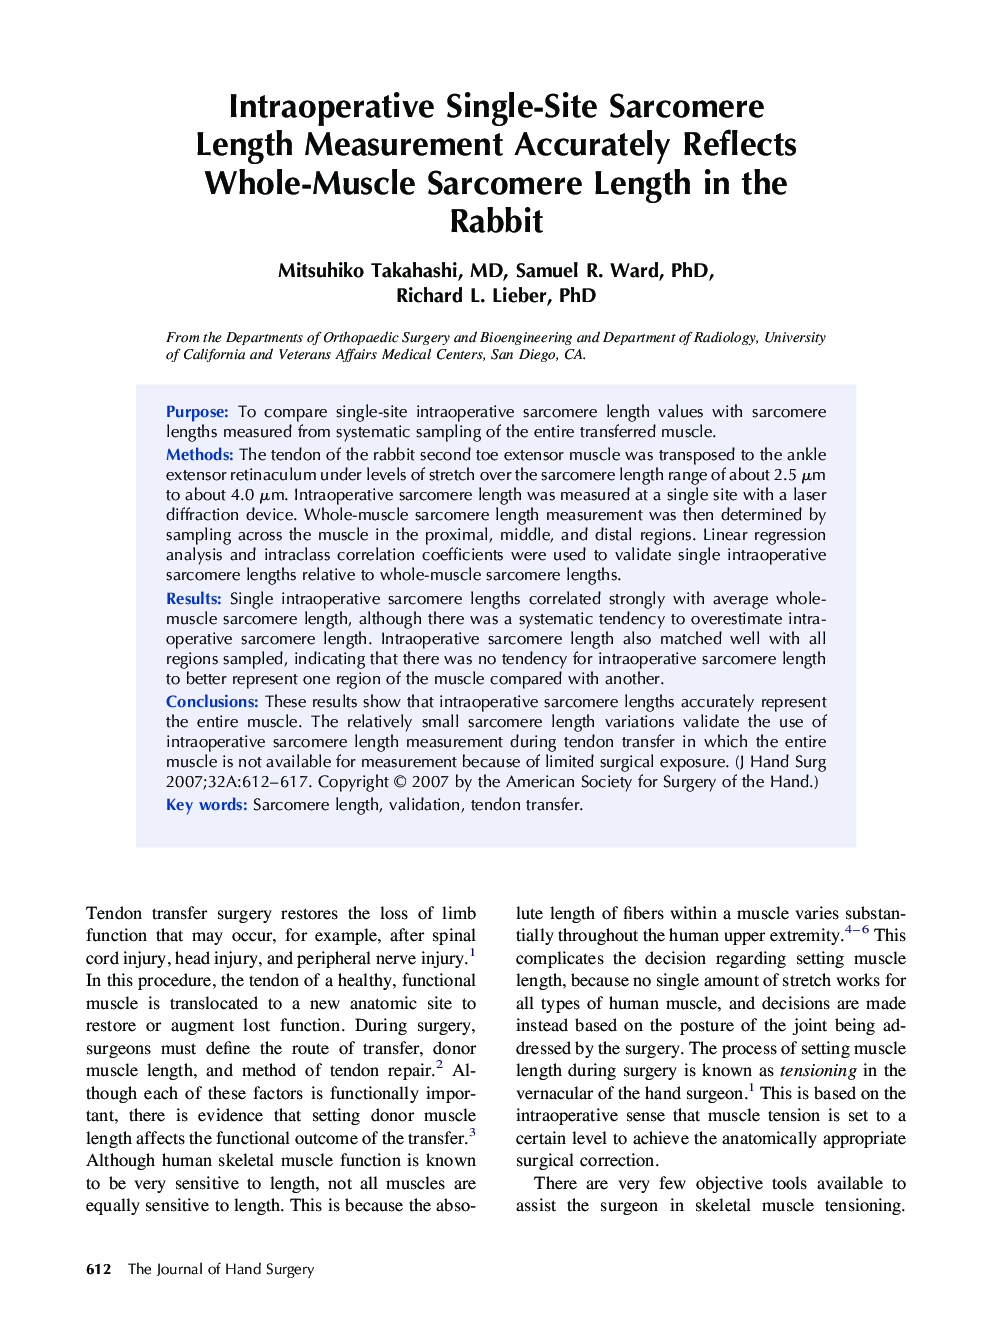 Intraoperative Single-Site Sarcomere Length Measurement Accurately Reflects Whole-Muscle Sarcomere Length in the Rabbit 